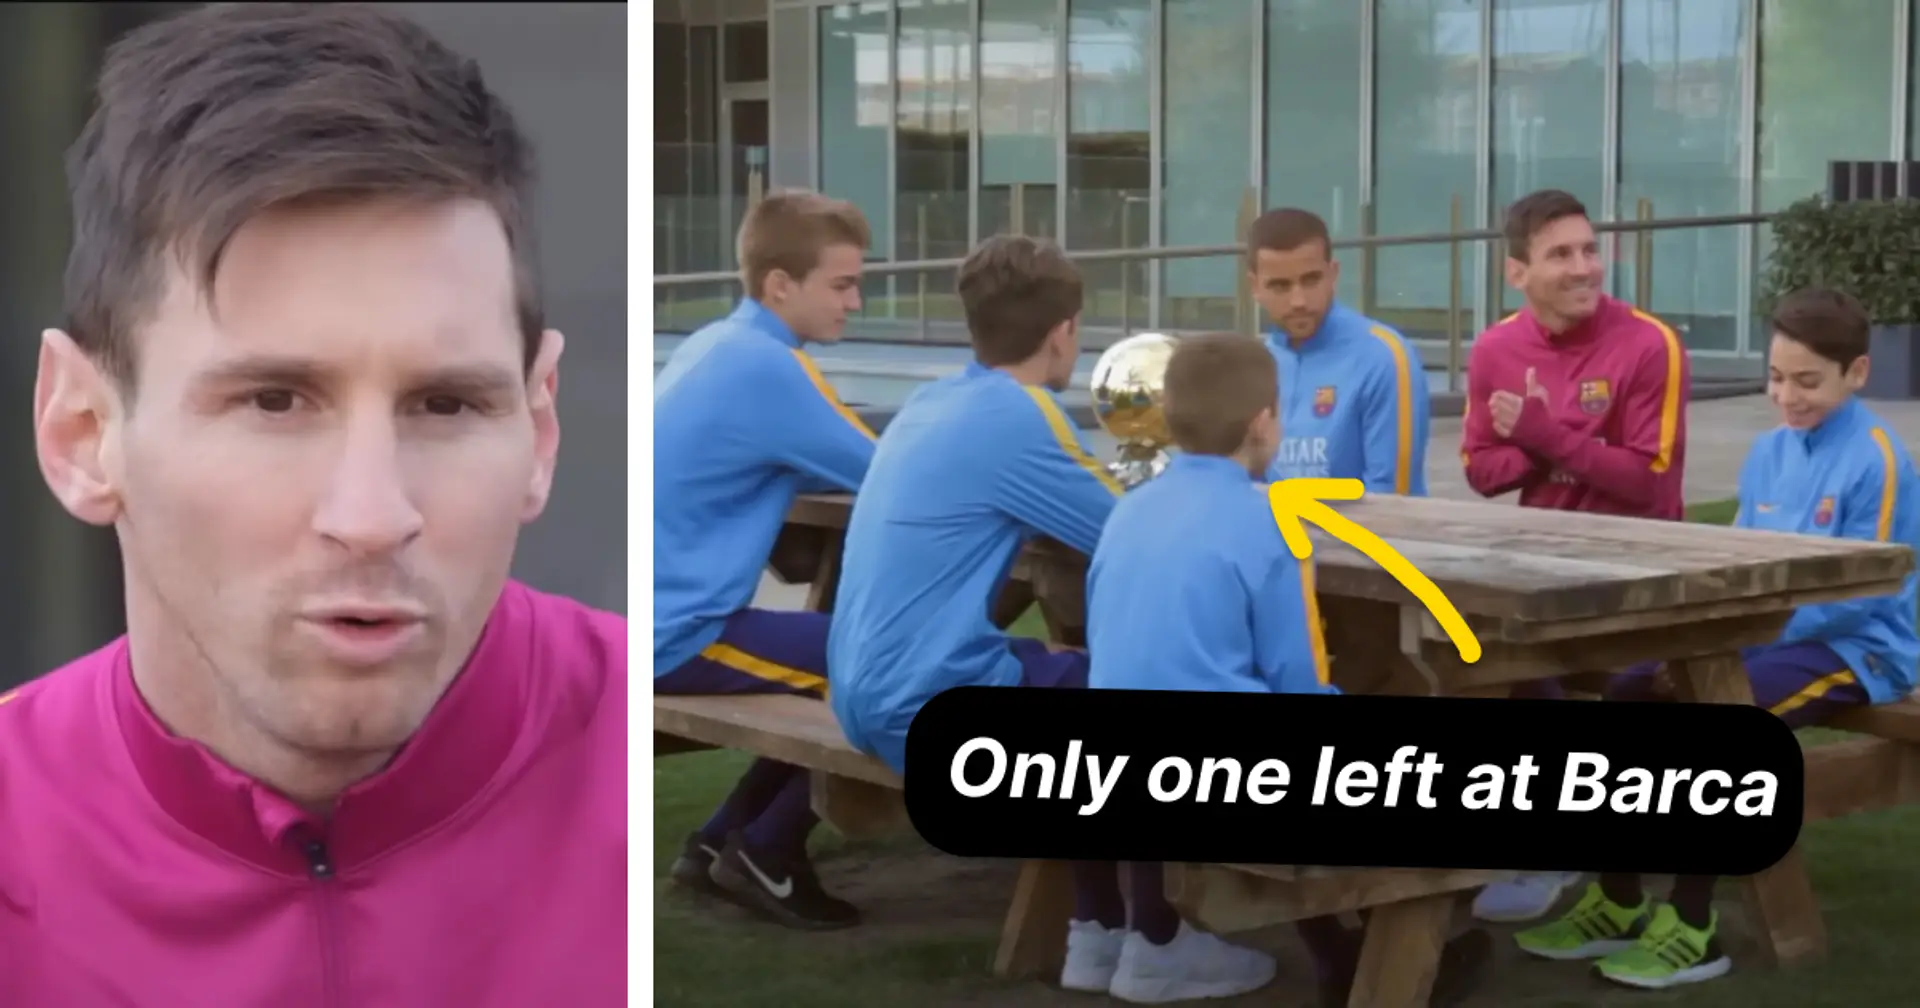 What happened to 5 La Masia kids who interviewed Leo Messi with Ballon d'Or on the table — answered